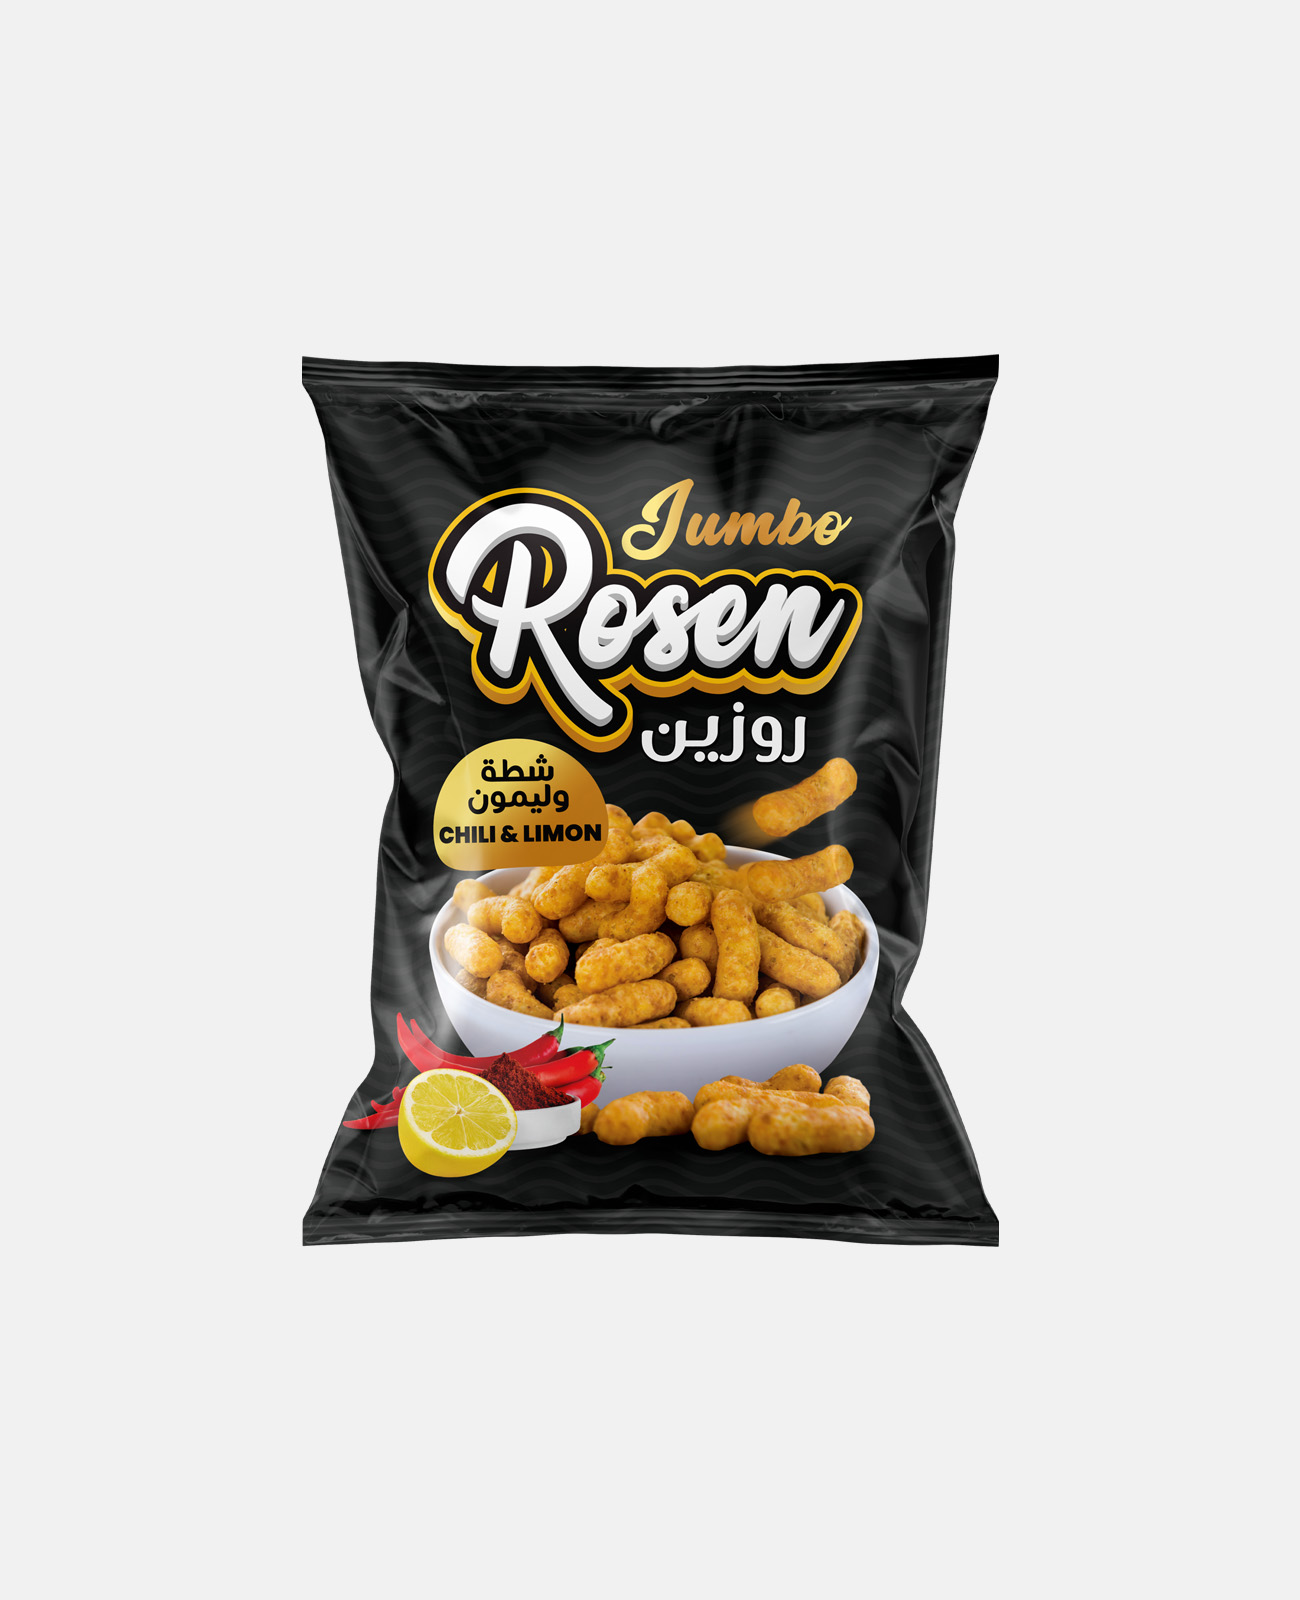 Rosin Chips Flavored with Chili and Lemon